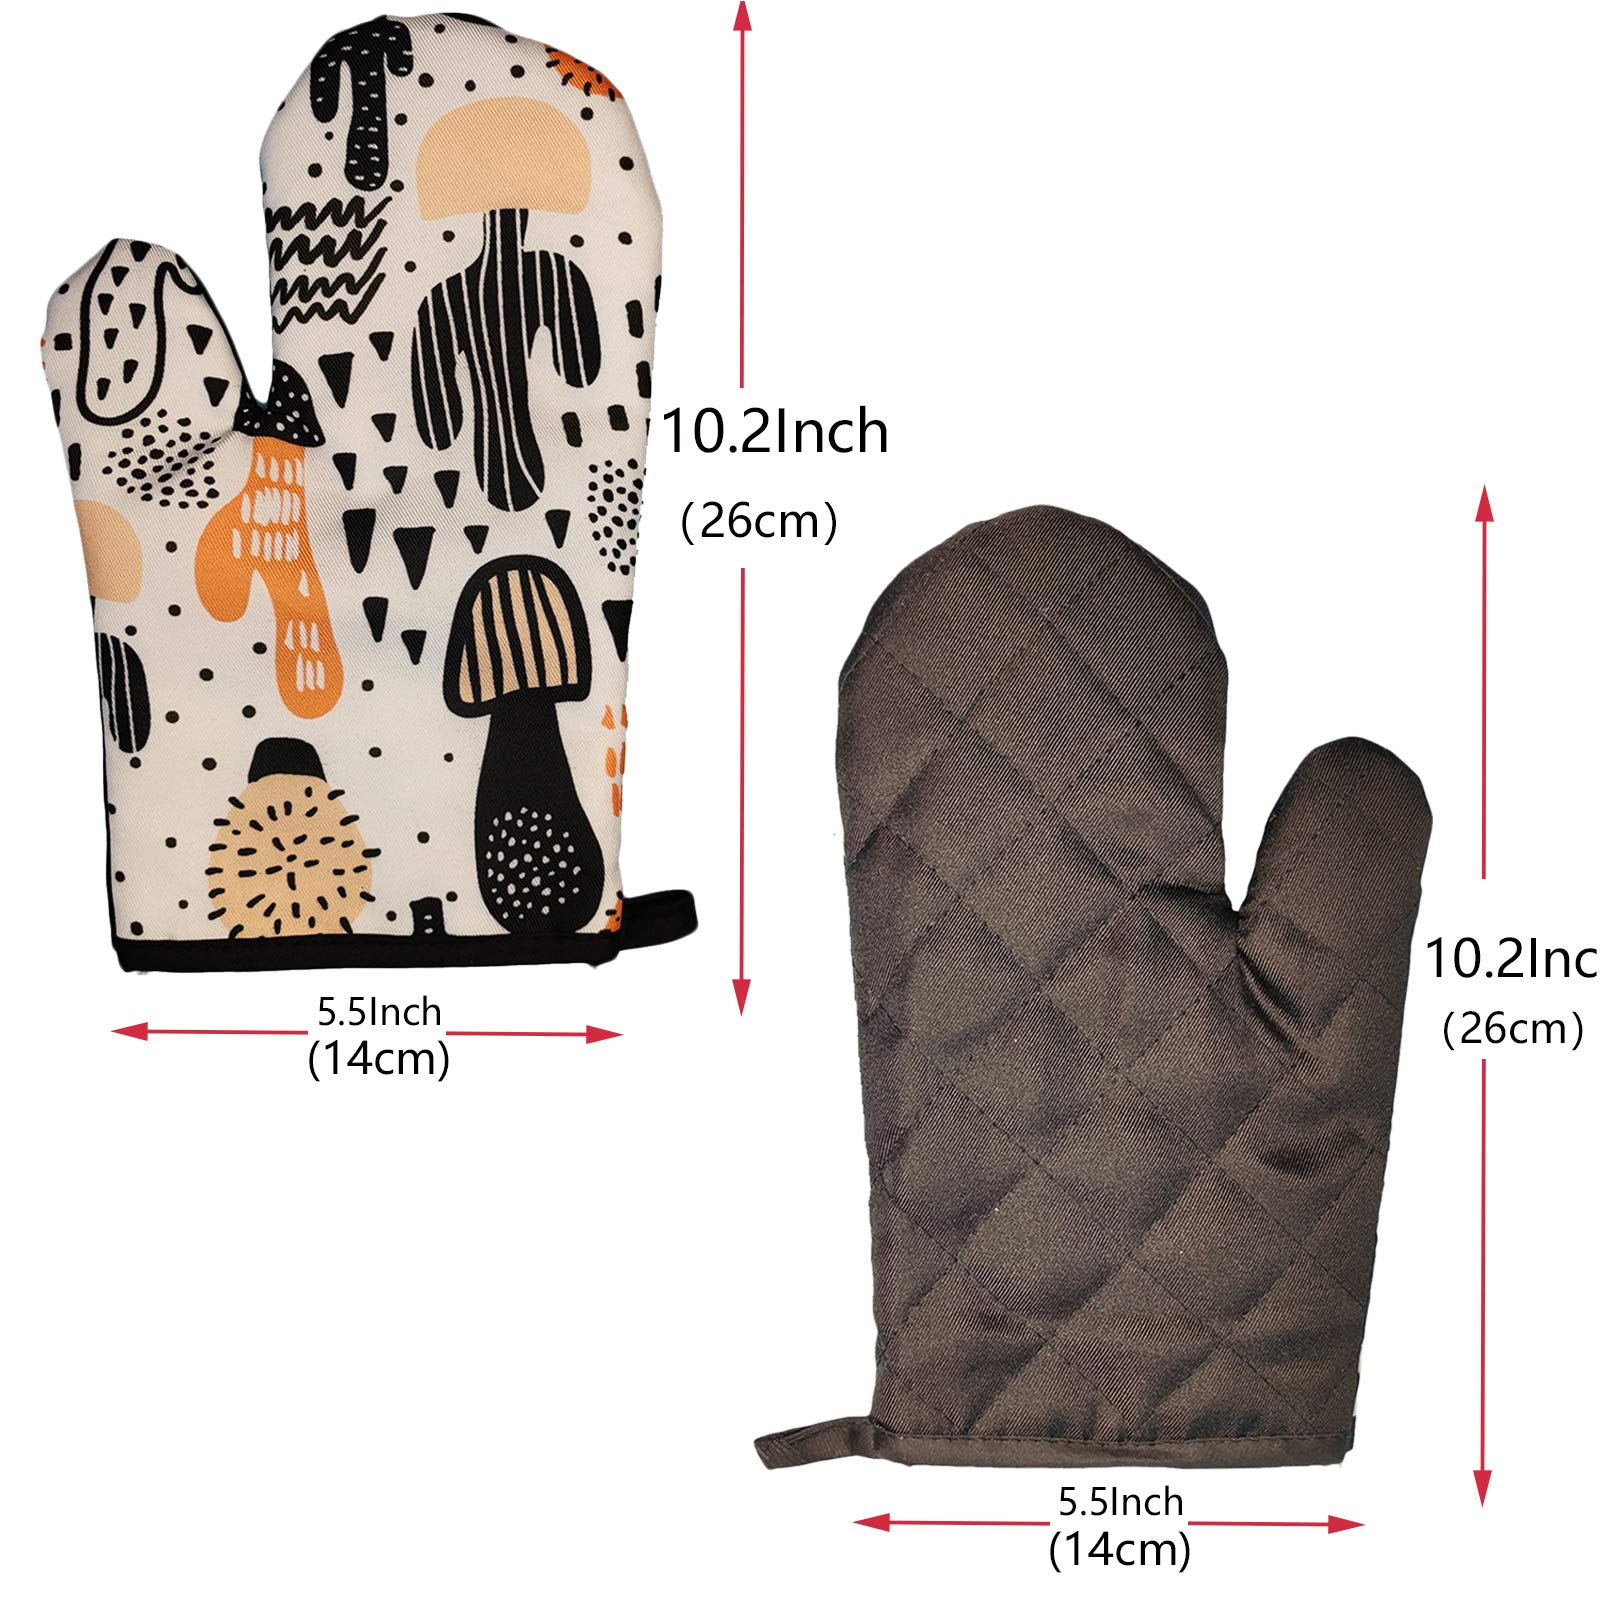 FSTIKO Novelty Cactus Oven Mitts and Potholders 4 Pieces Set, Kitchen Linen Set BBQ Gloves-Oven Mitts High Heat Resistant Cotton Potholder Non-Slip Cooking Gloves for Cooking, Baking, Barbecue